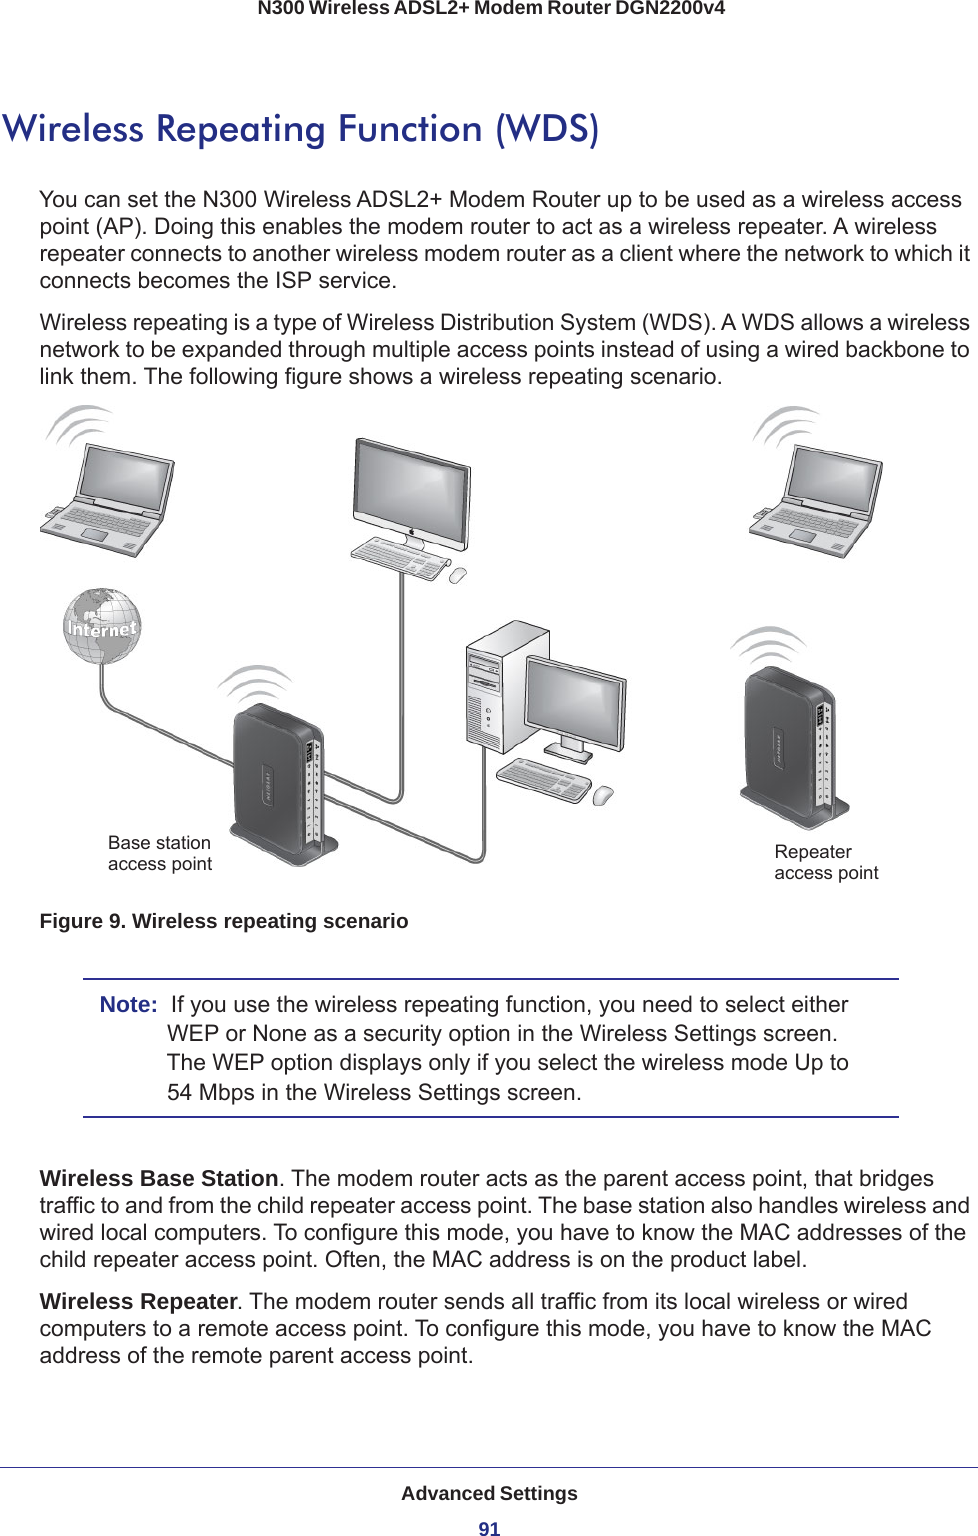 Advanced Settings91 N300 Wireless ADSL2+ Modem Router DGN2200v4Wireless Repeating Function (WDS)You can set the N300 Wireless ADSL2+ Modem Router up to be used as a wireless access point (AP). Doing this enables the modem router to act as a wireless repeater. A wireless repeater connects to another wireless modem router as a client where the network to which it connects becomes the ISP service.Wireless repeating is a type of Wireless Distribution System (WDS). A WDS allows a wireless network to be expanded through multiple access points instead of using a wired backbone to link them. The following figure shows a wireless repeating scenario.RepeaterBase stationaccess pointaccess pointFigure 9. Wireless repeating scenarioNote:  If you use the wireless repeating function, you need to select either WEP or None as a security option in the Wireless Settings screen. The WEP option displays only if you select the wireless mode Up to 54 Mbps in the Wireless Settings screen.Wireless Base Station. The modem router acts as the parent access point, that bridges traffic to and from the child repeater access point. The base station also handles wireless and wired local computers. To configure this mode, you have to know the MAC addresses of the child repeater access point. Often, the MAC address is on the product label.Wireless Repeater. The modem router sends all traffic from its local wireless or wired computers to a remote access point. To configure this mode, you have to know the MAC address of the remote parent access point. 